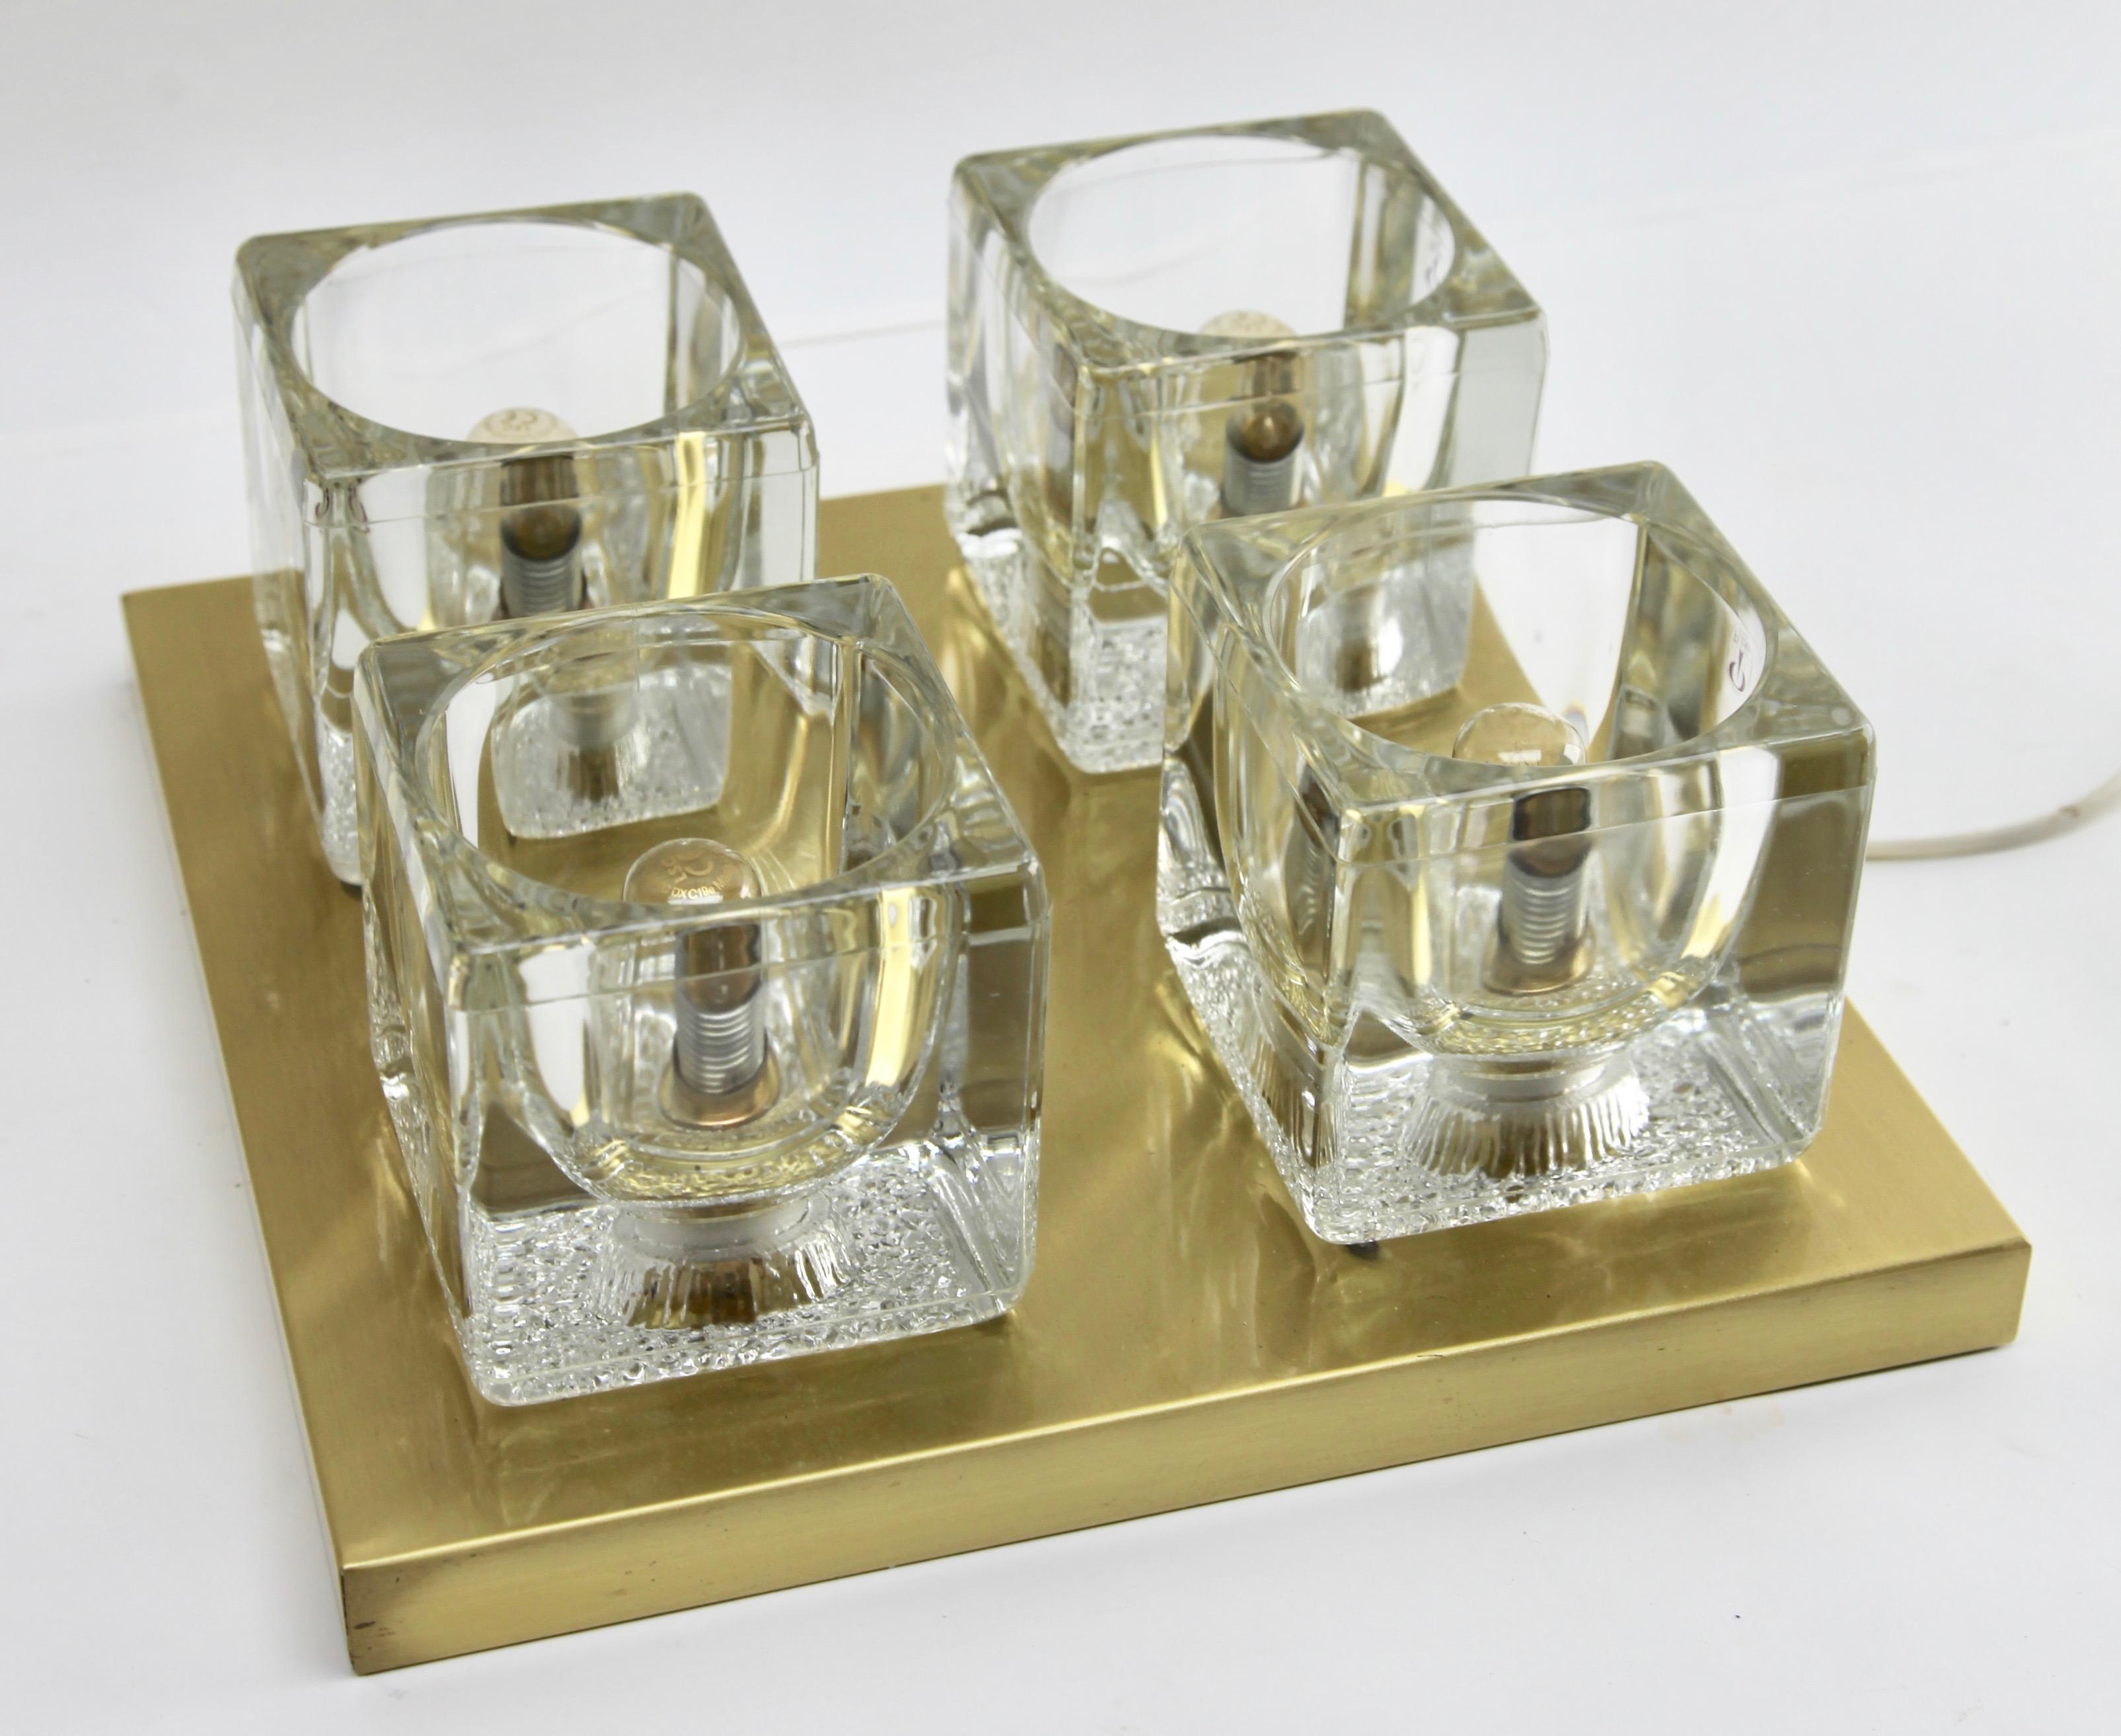 Peill & Putzler, Midcentury Set of 3 Modernist German Glass Cube Wall Sconces For Sale 2